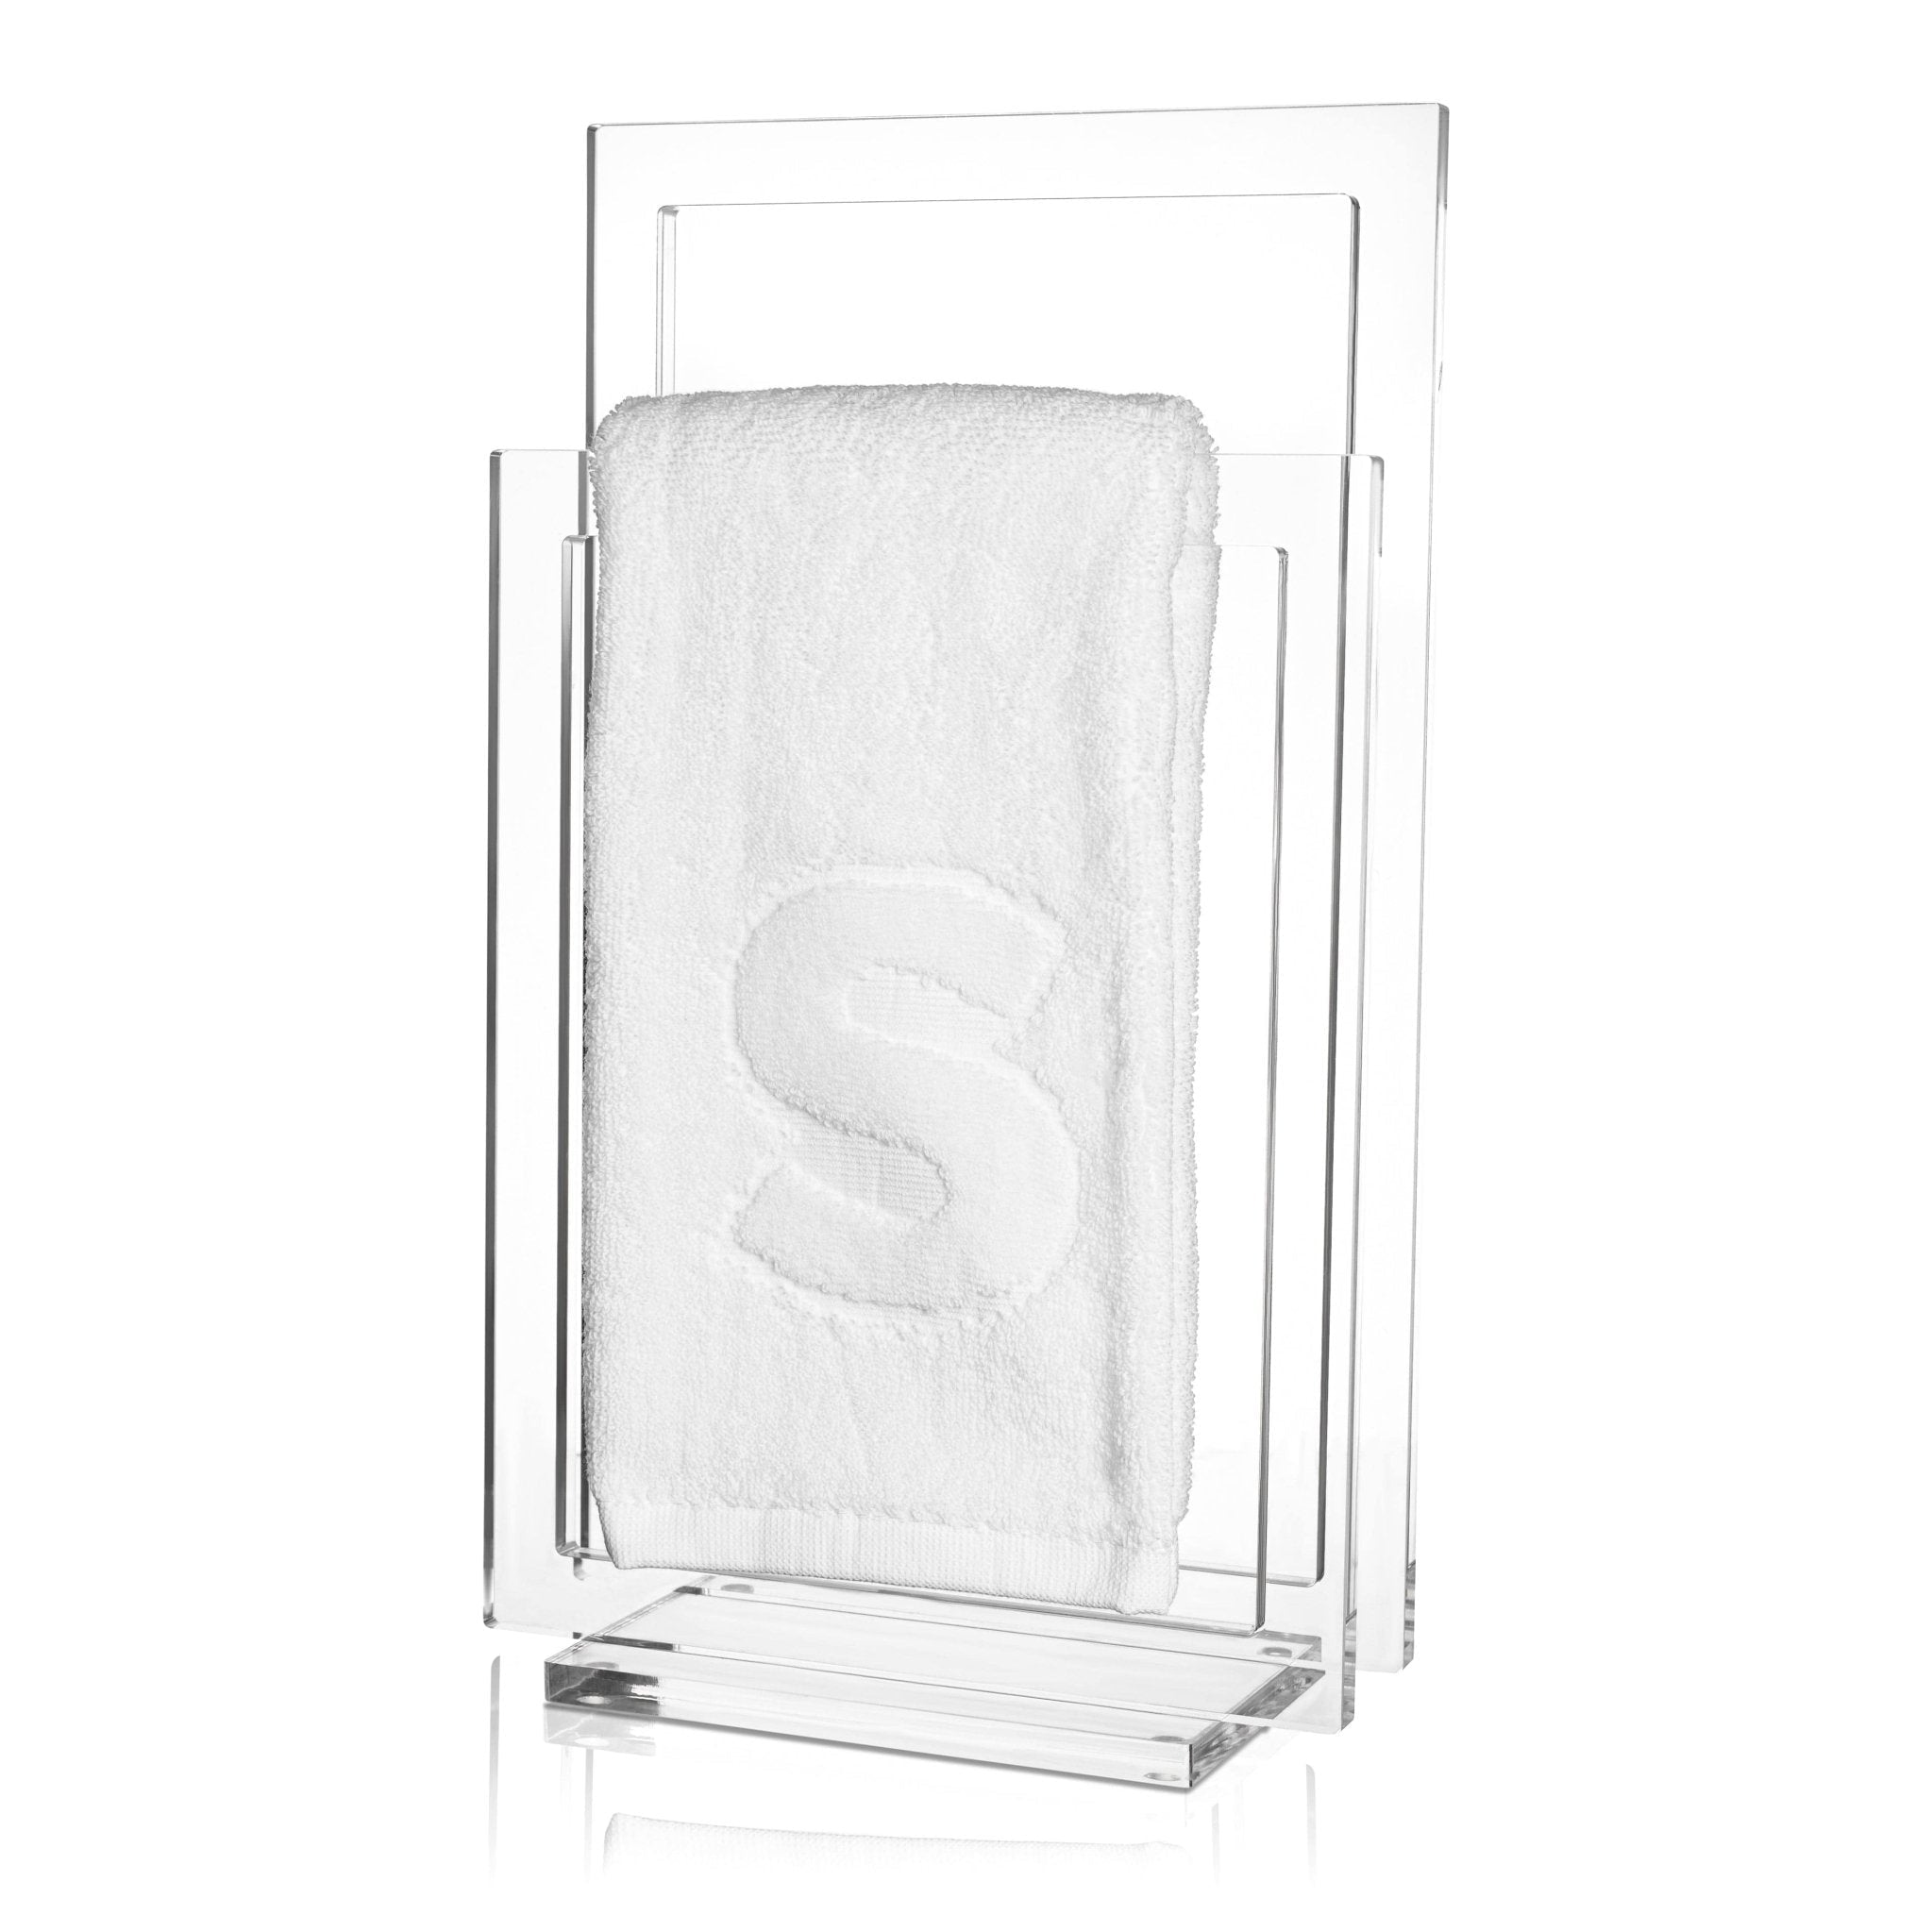 Corporate Gifting - Towel Stand - Waterdale Collection